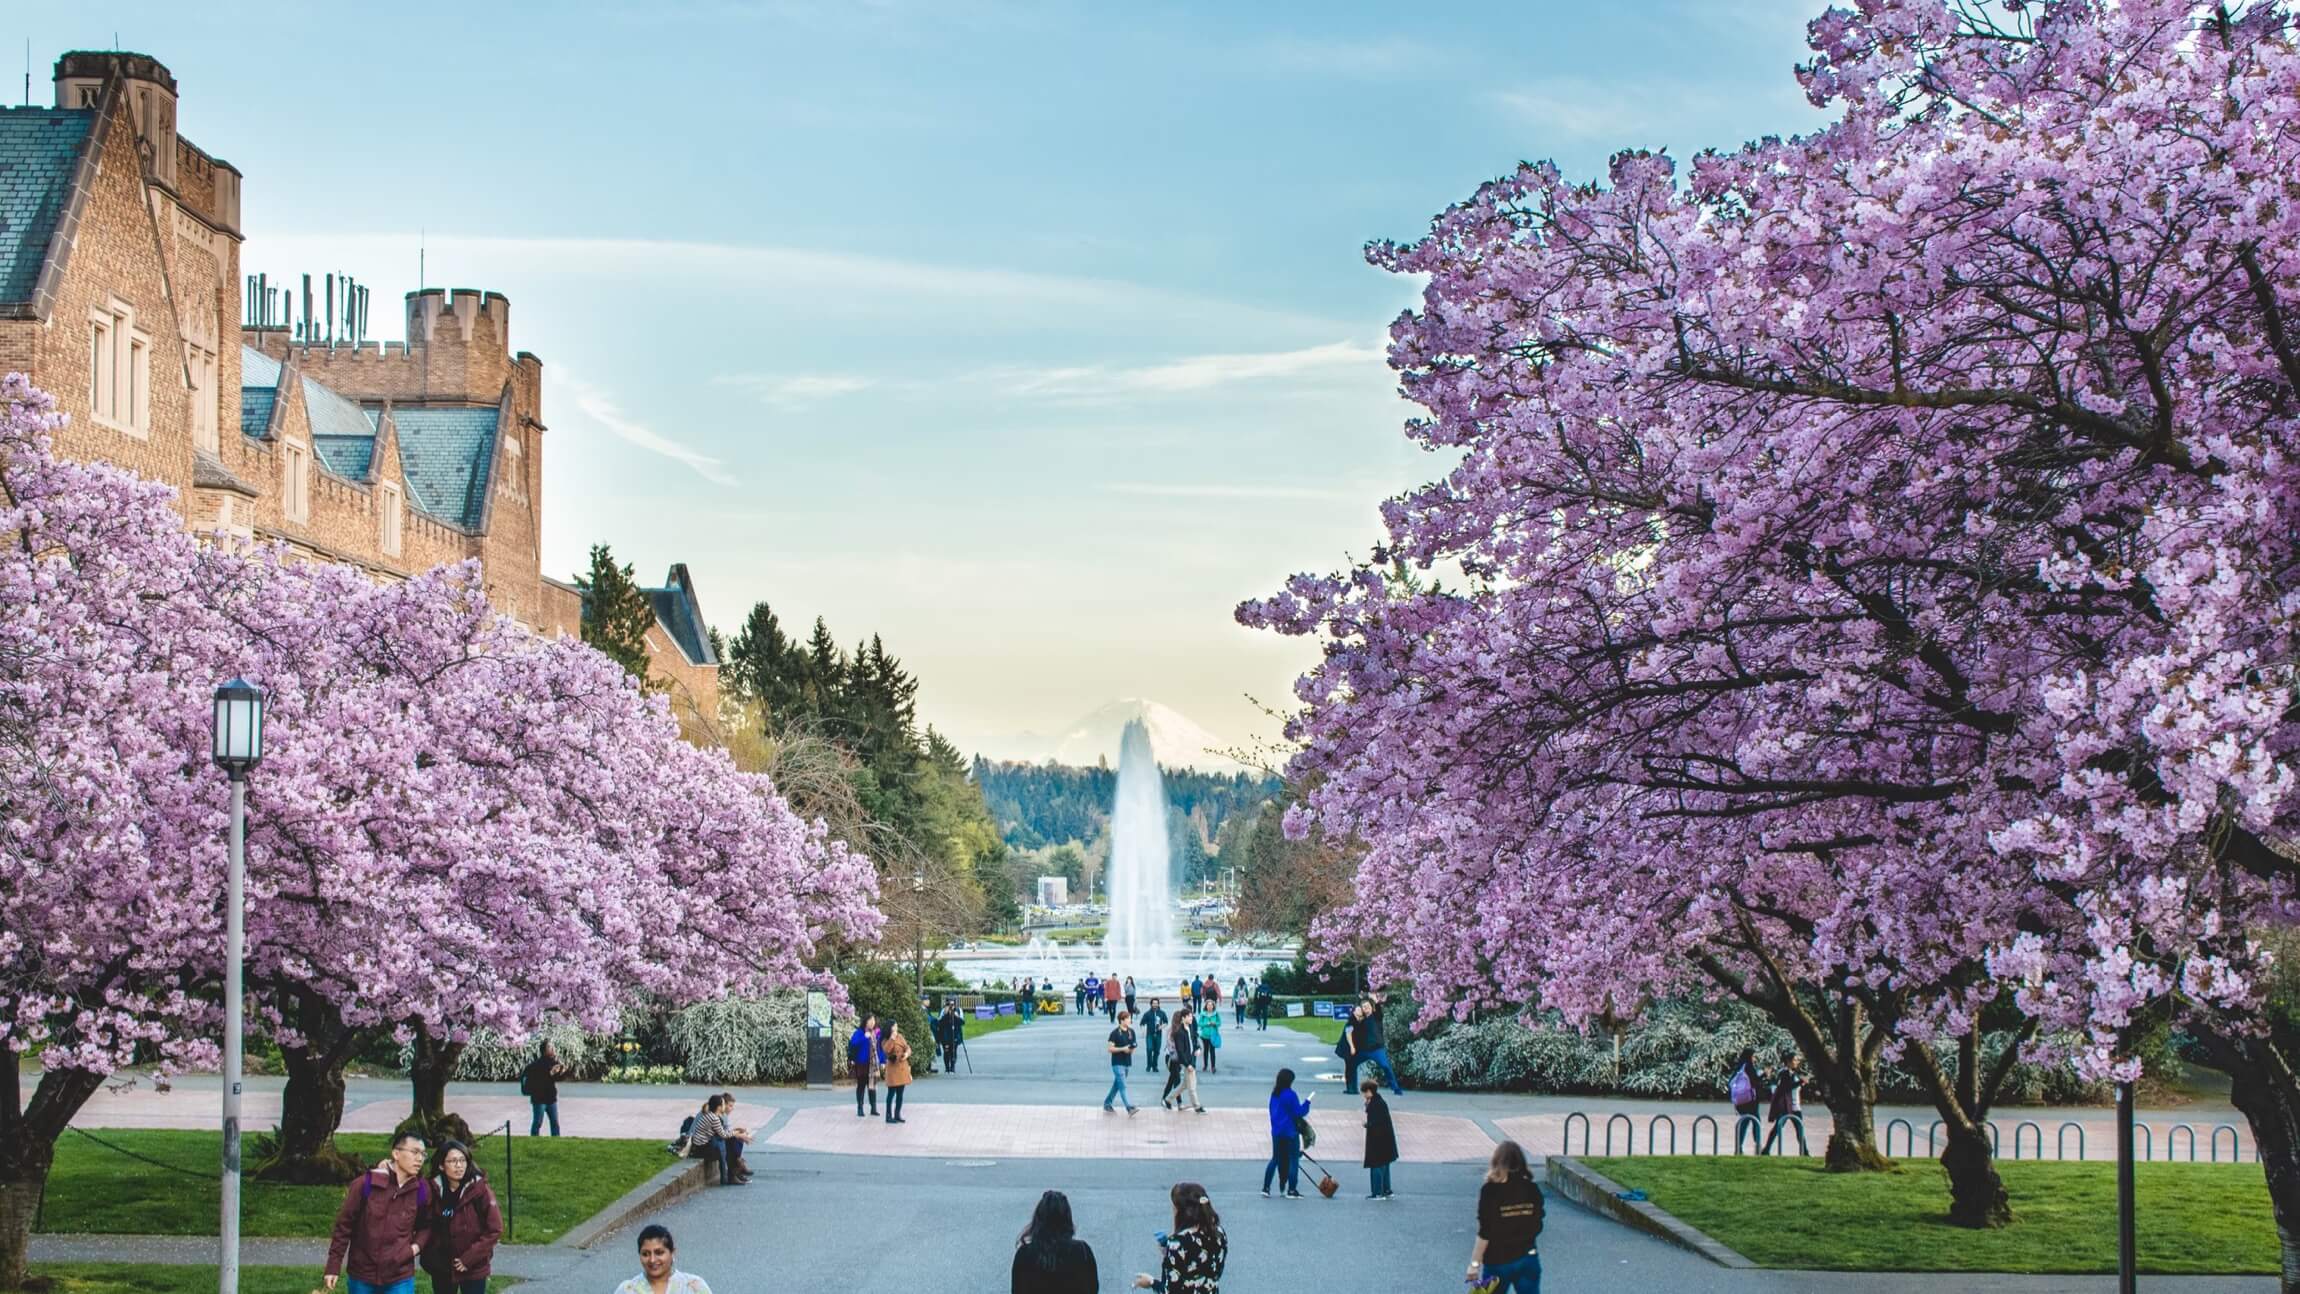 Photo of a busy part of the University of Washington campus in Seattle, with a view of Mount Rainier in the background